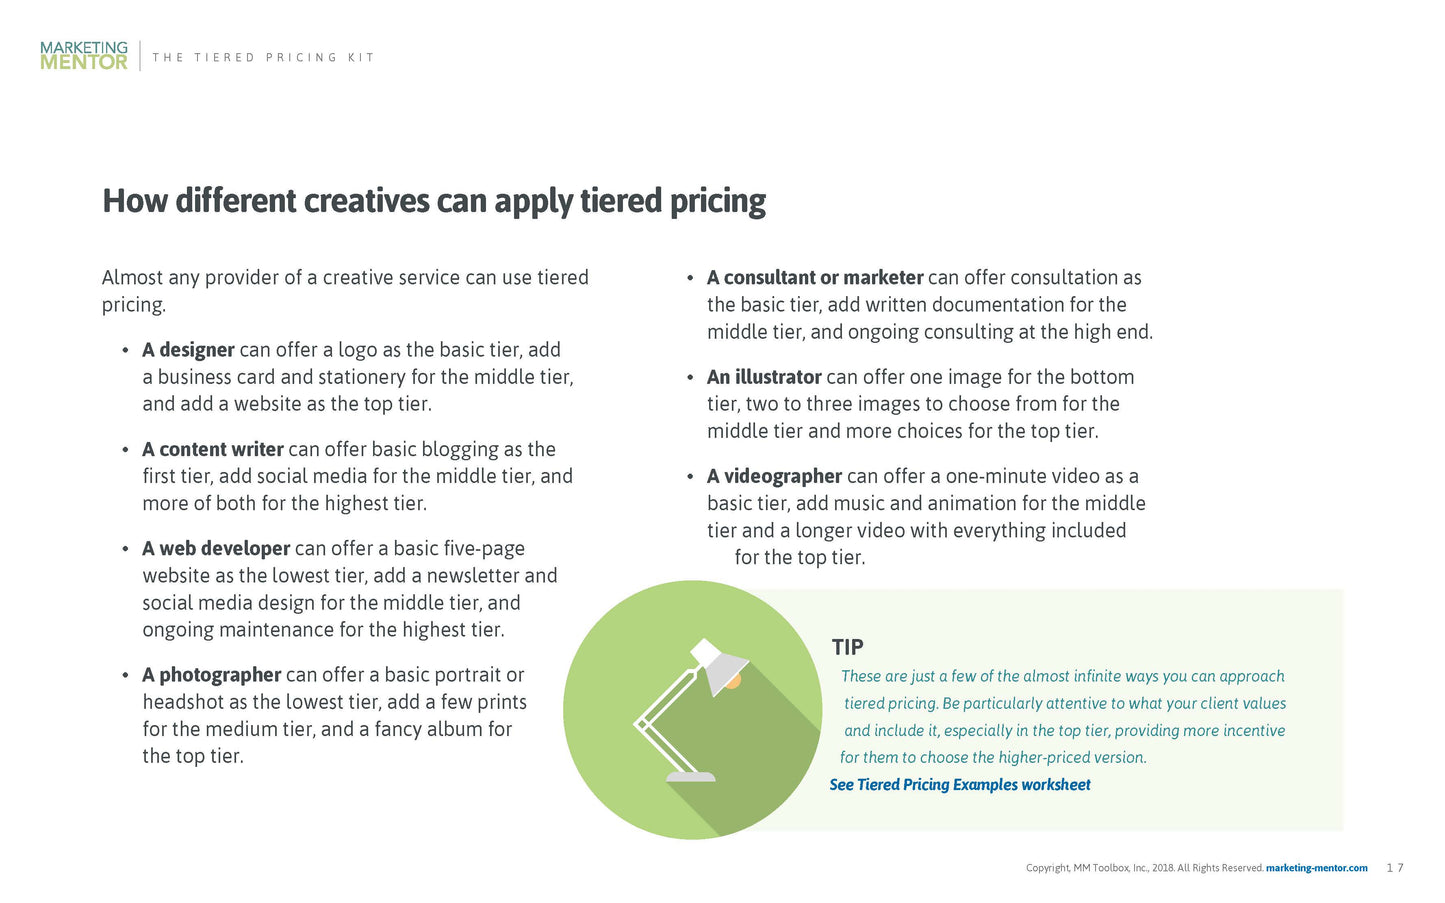 The Tiered Pricing Kit: How to Earn More on Every Project